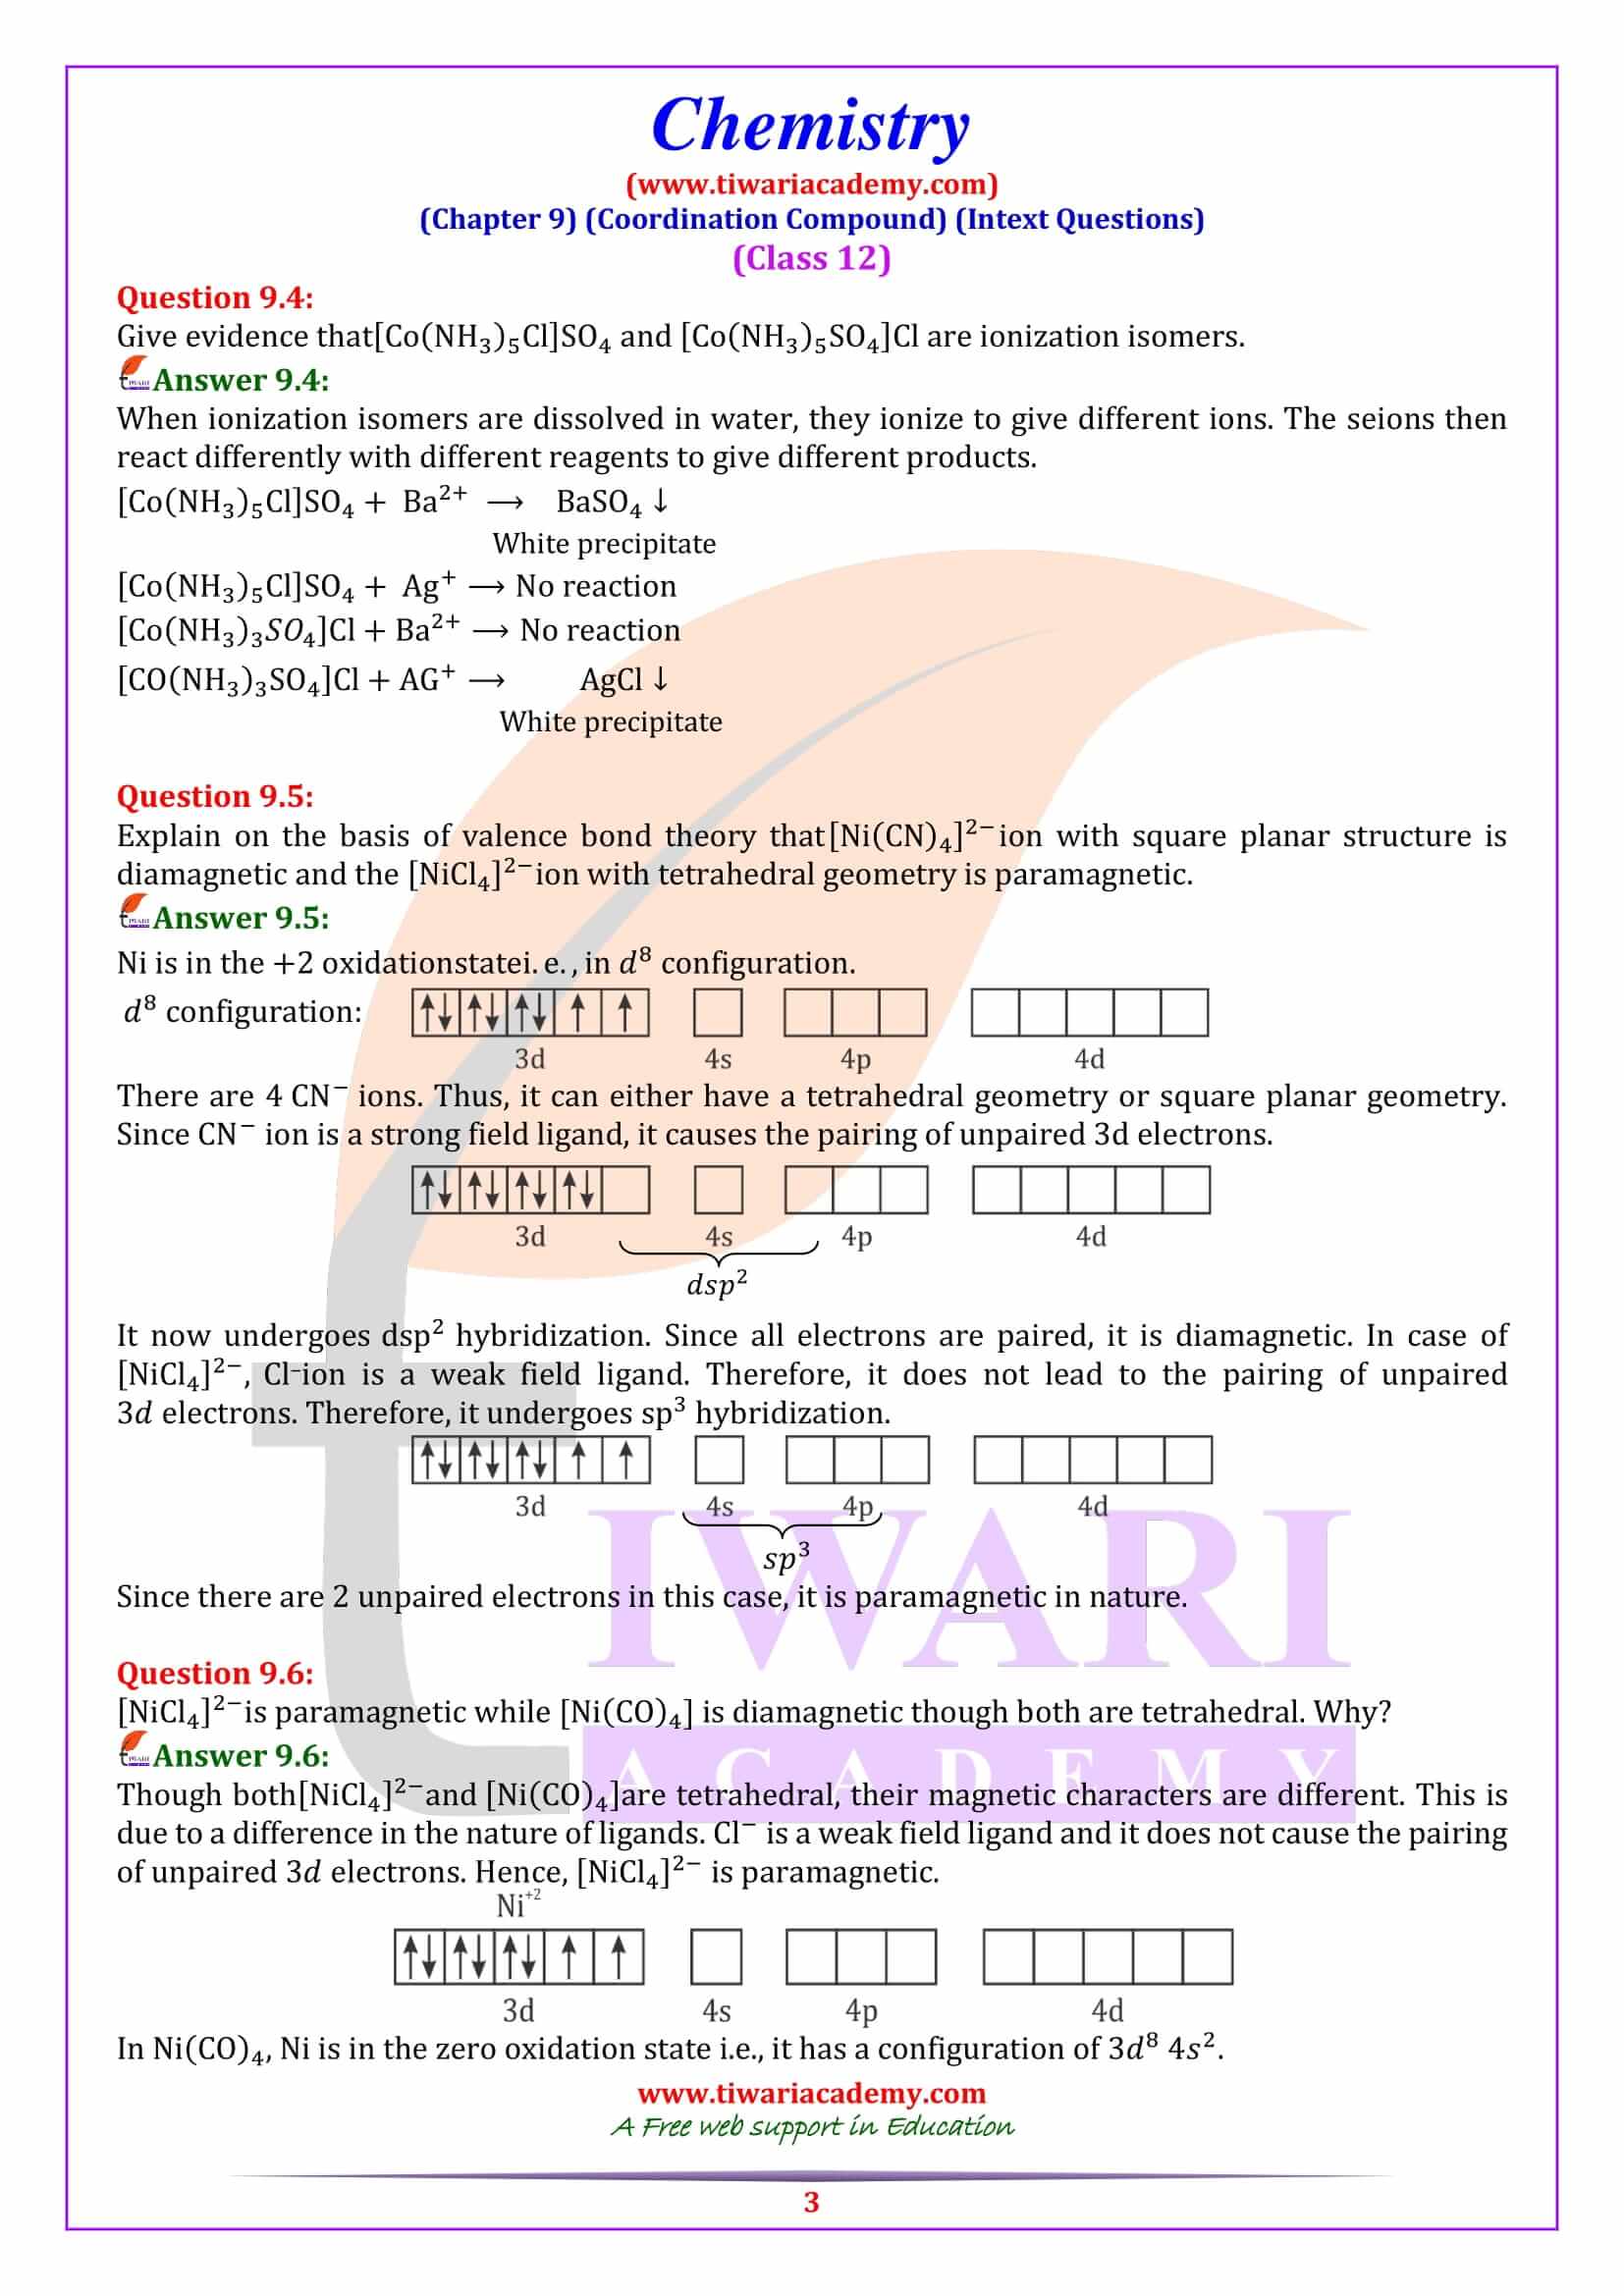 NCERT Solutions for Class 12 Chemistry Chapter 9 Intext Answers